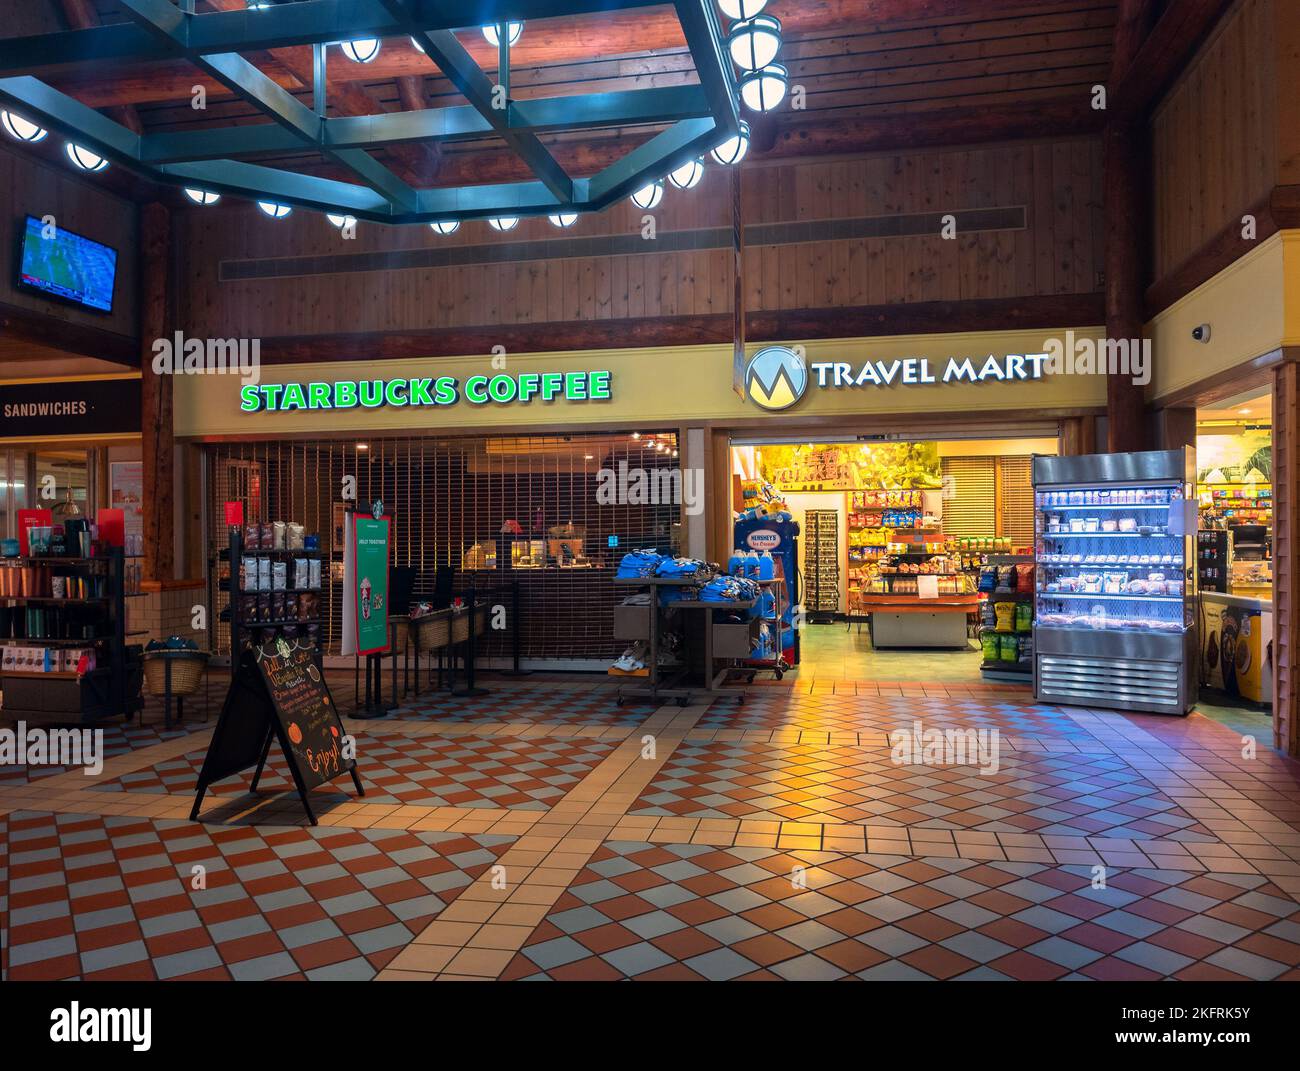 Pattersonville, New York - Nov 12, 2022: Landscape View of Starbucks Coffee and Travel Mart inside Pattersonville Travel Plaza. Stock Photo